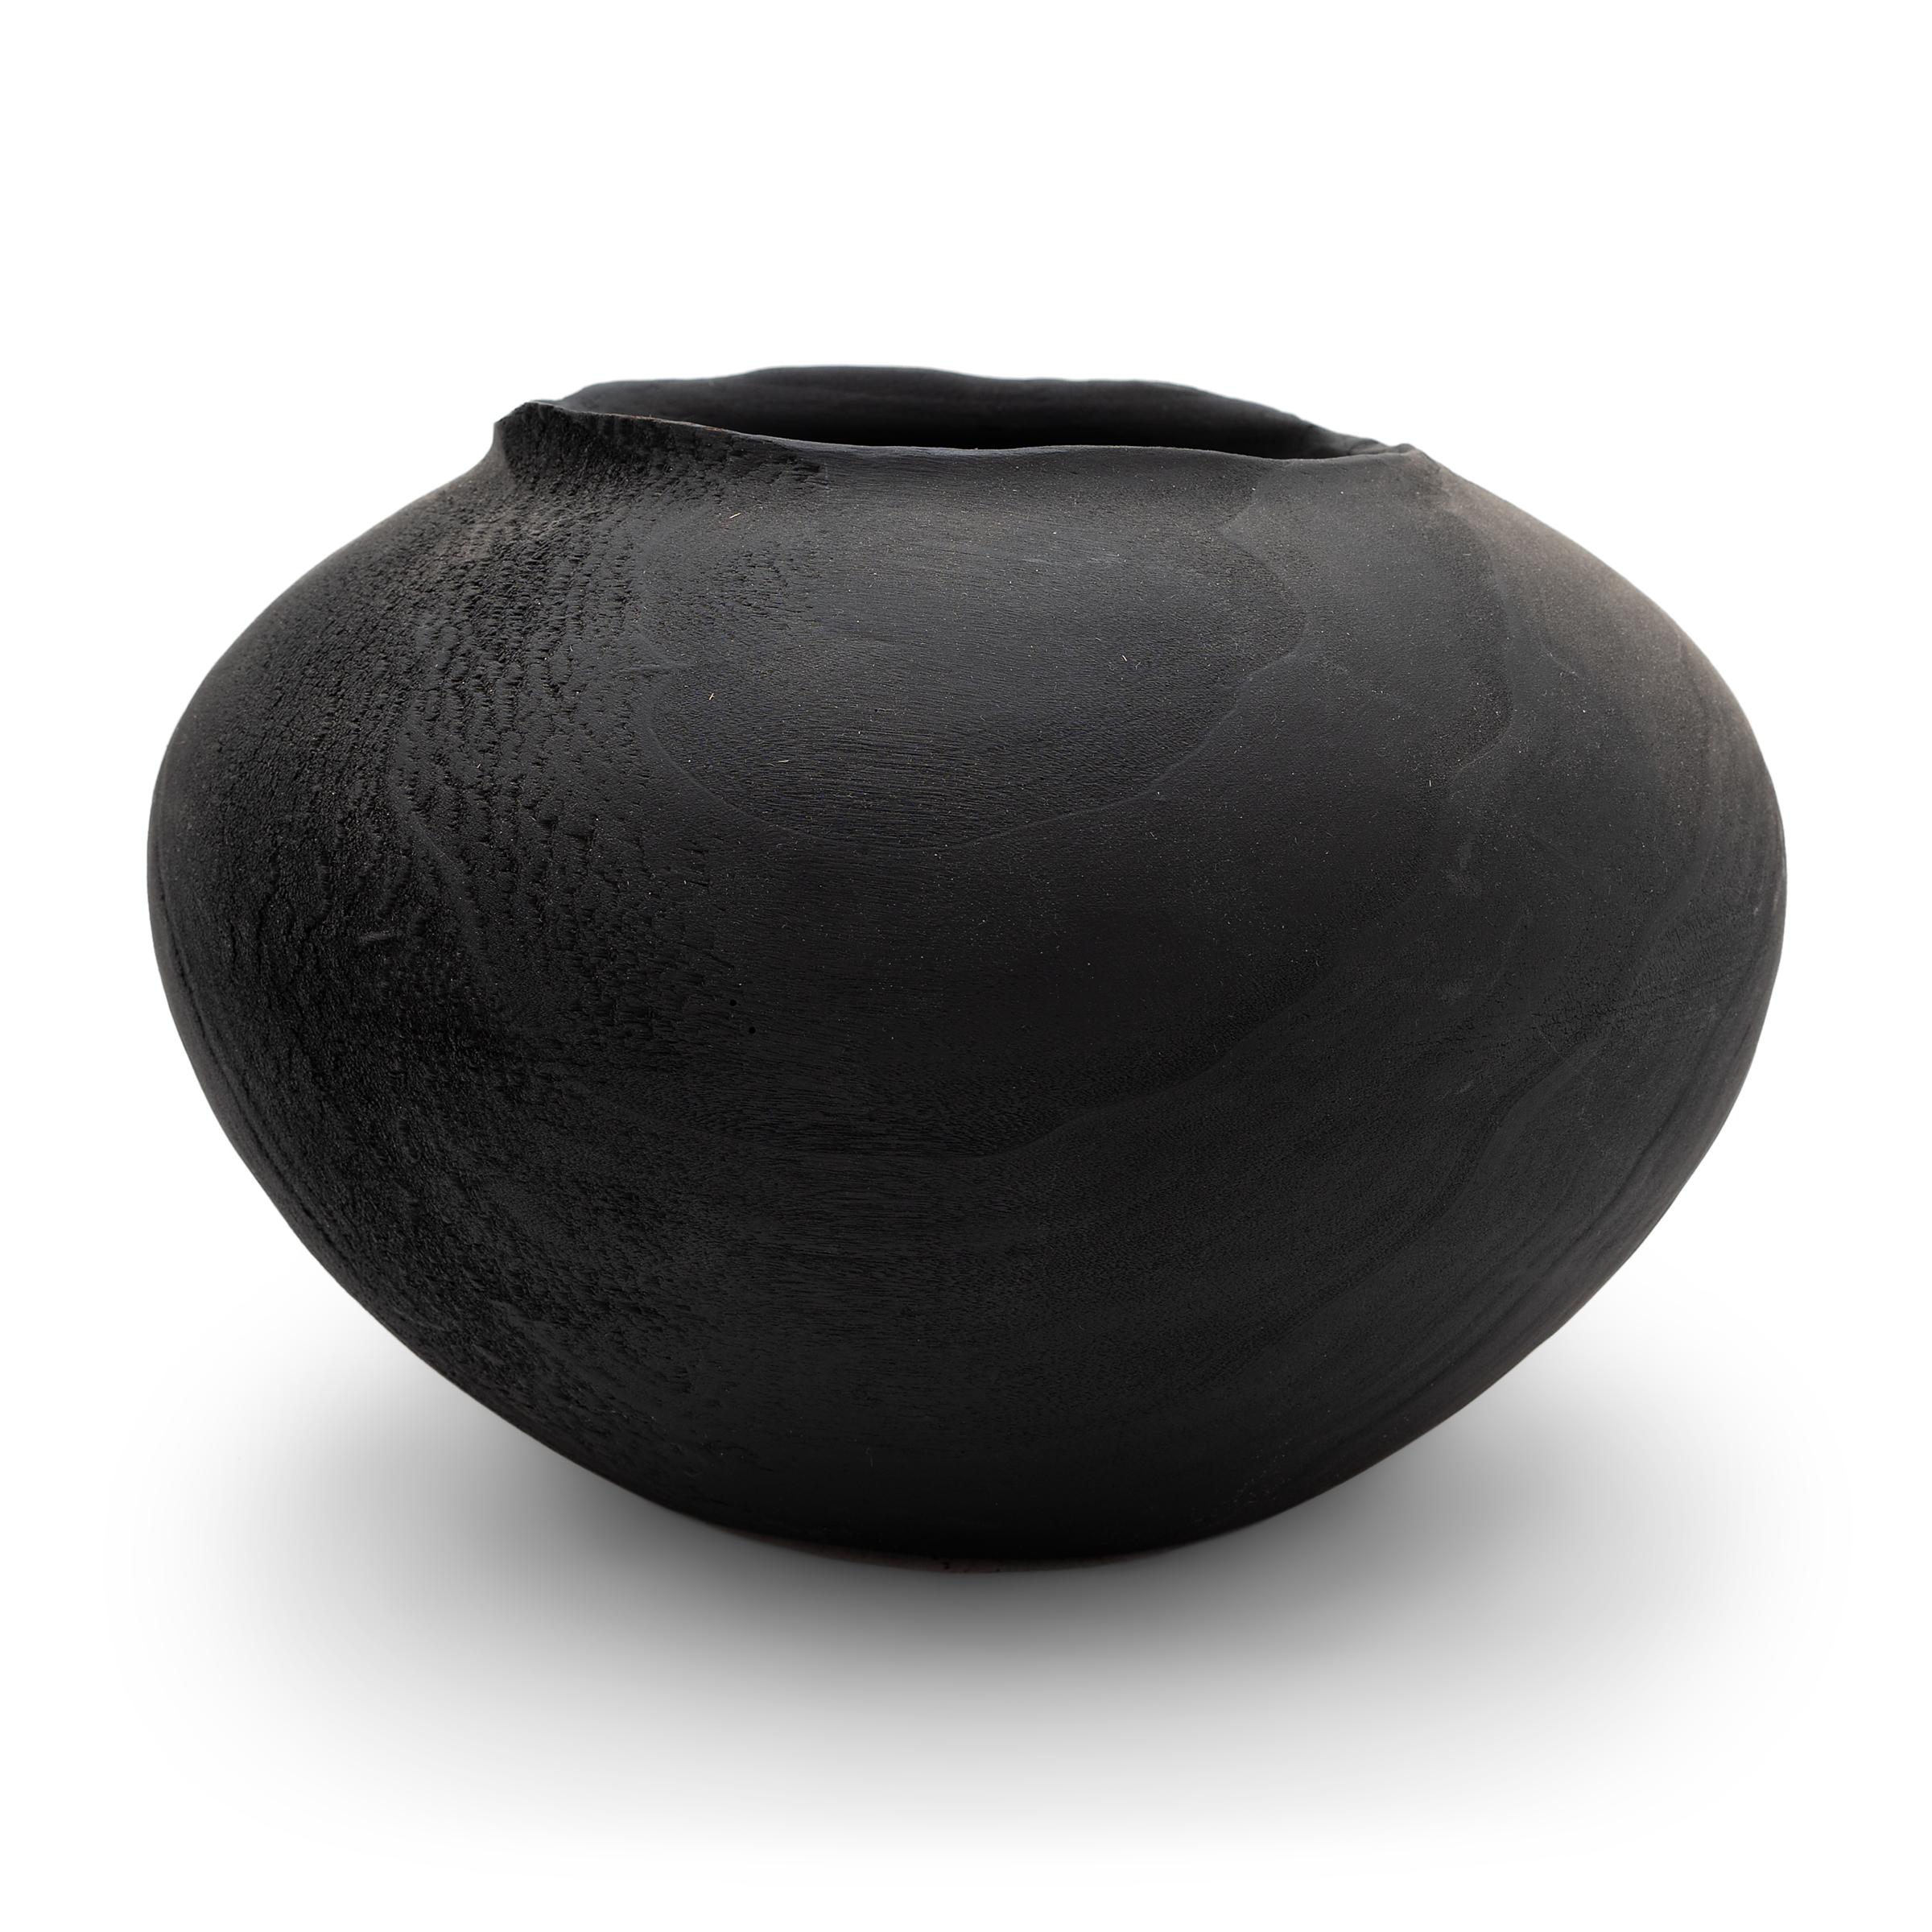 This wooden bowl was turned from a solid block of heartwood, the dense, innermost portion of a tree. The vessel has a rounded body, shaped with a tapered base, shallow interior and slightly flared lip. The bowl has been stained dark for a matte